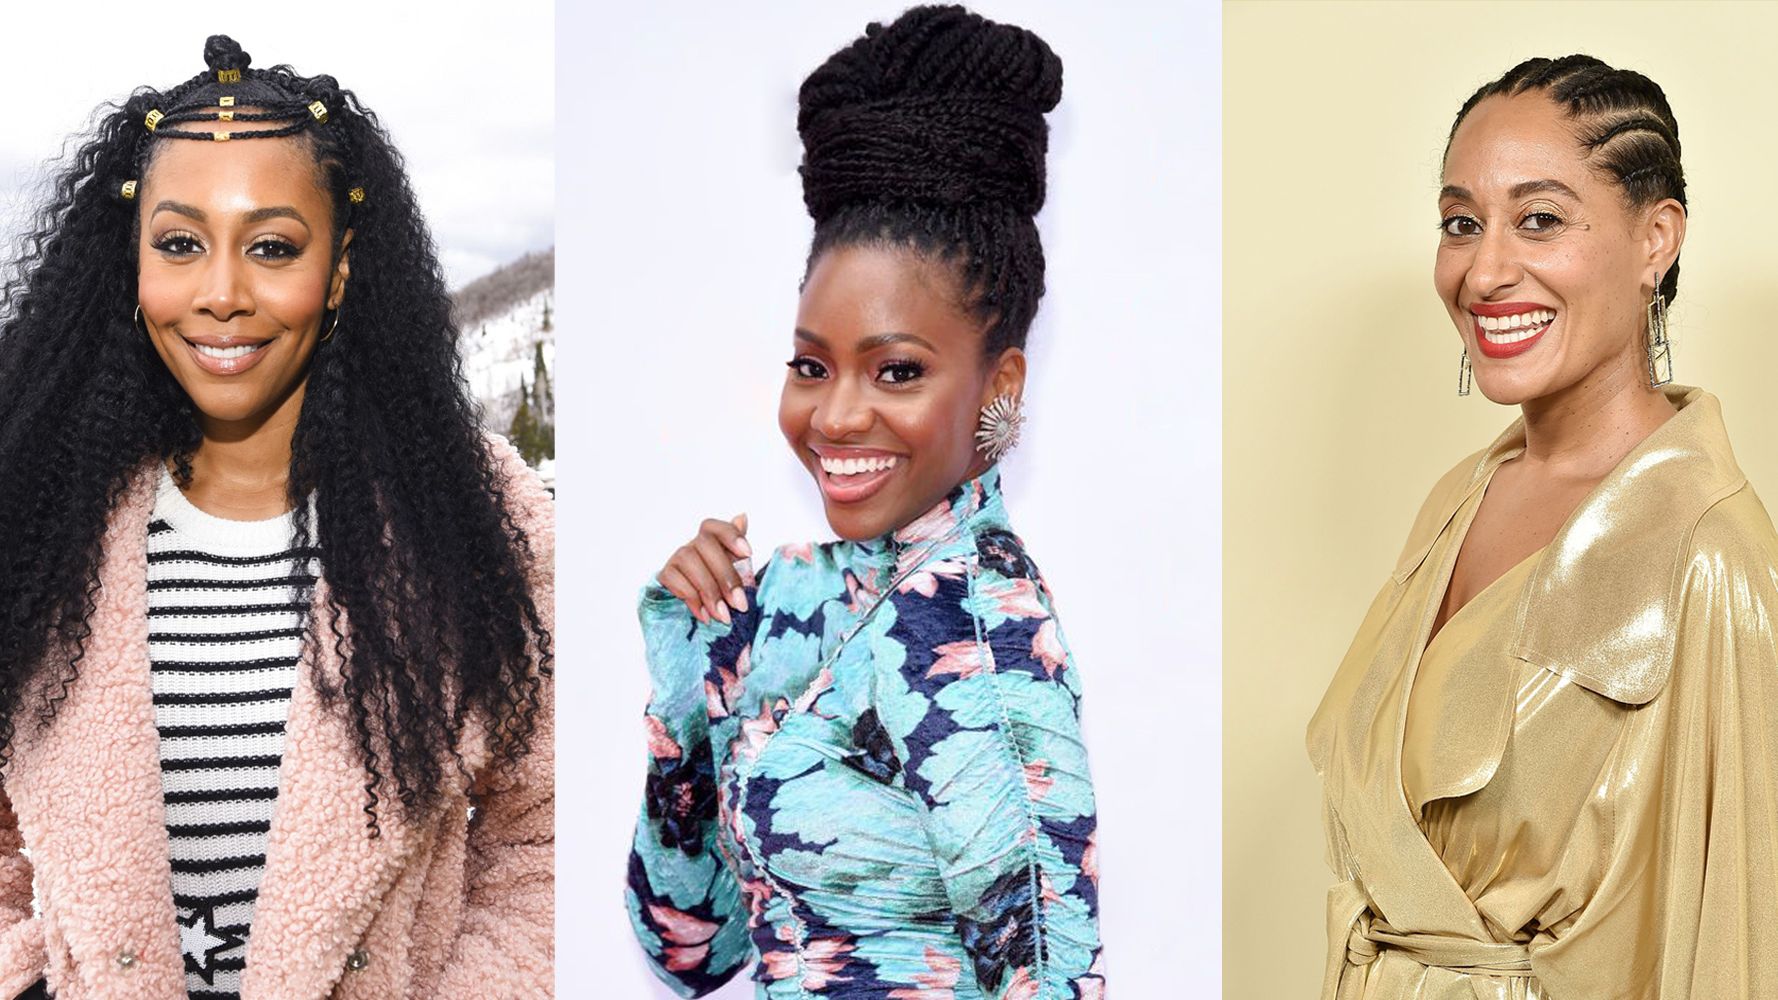 braid hairstyles with curls for black girls